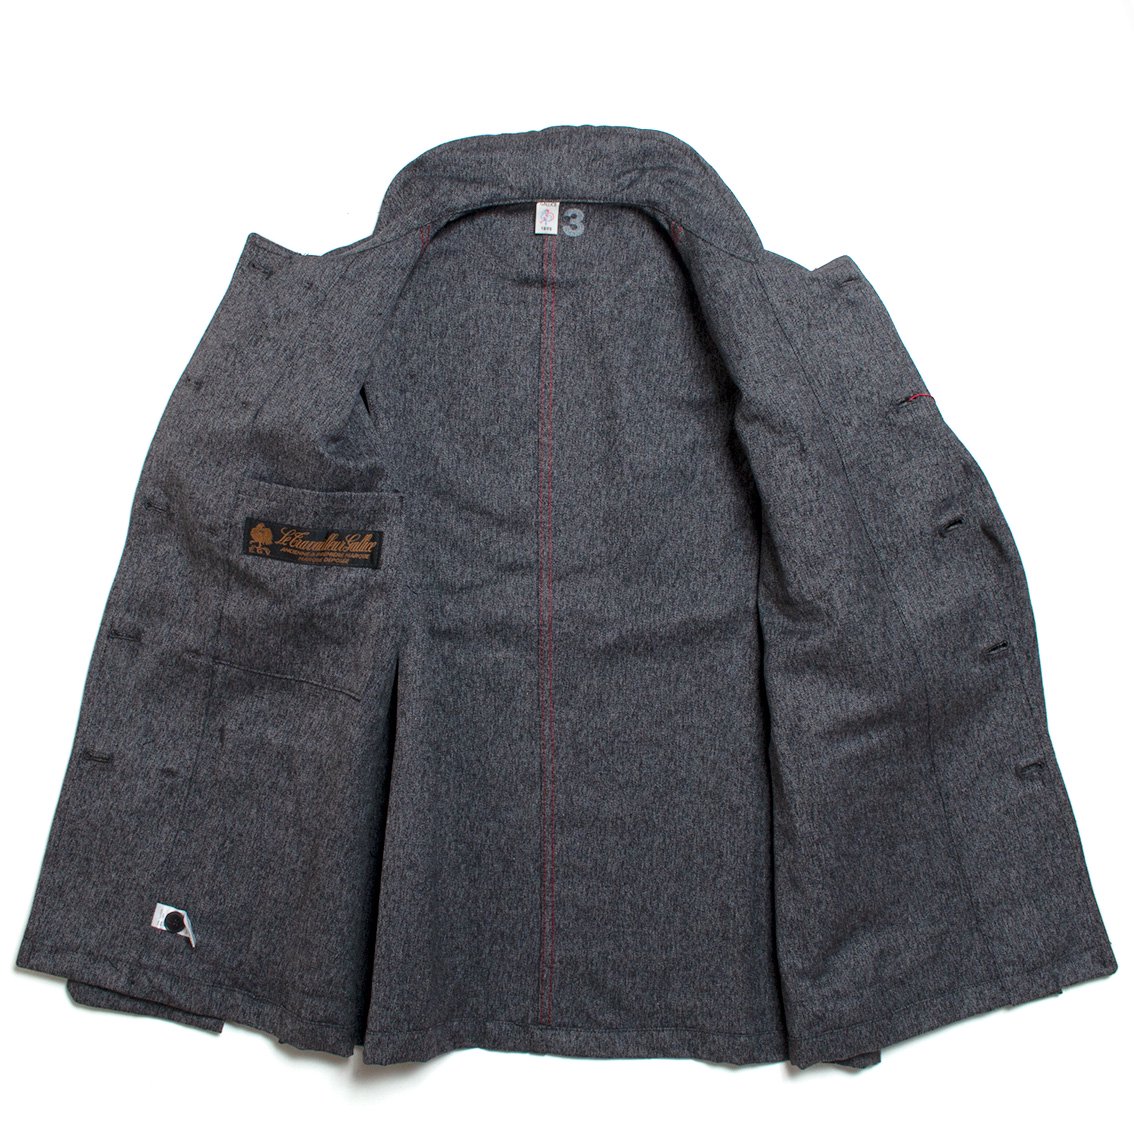 LE TRAVAILLEUR GALLICE / ル トラヴァイユール ガリス] VESTE DOUBLE 